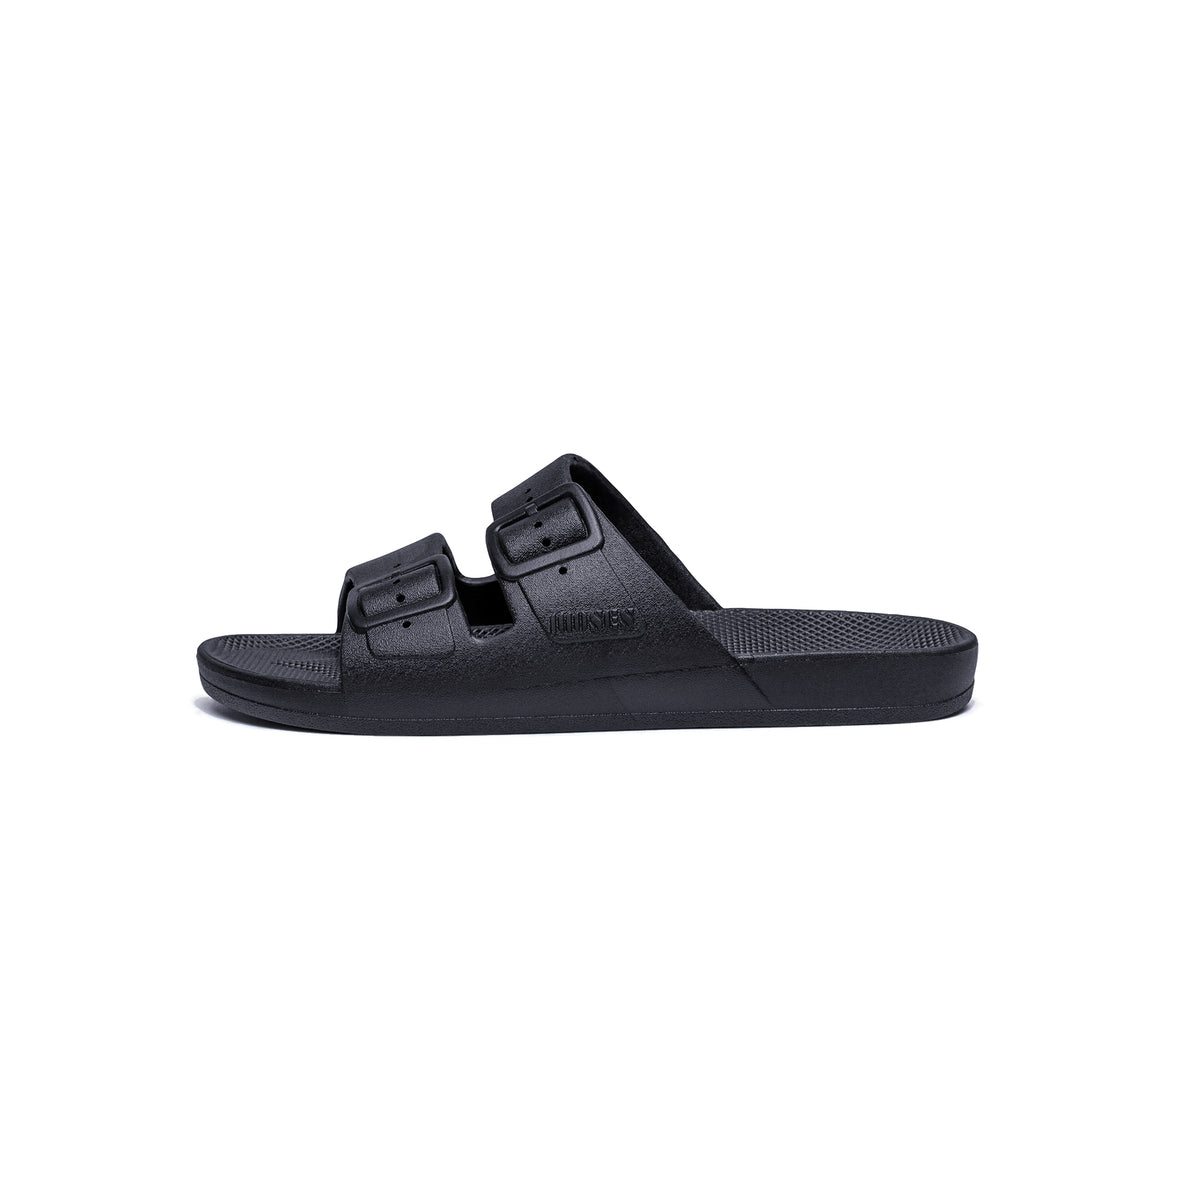 Parallel Culture Shoes and Fashion Online SLIDES FREEDOM MOSES FREEDOM MOSES SOLIDS BLACK